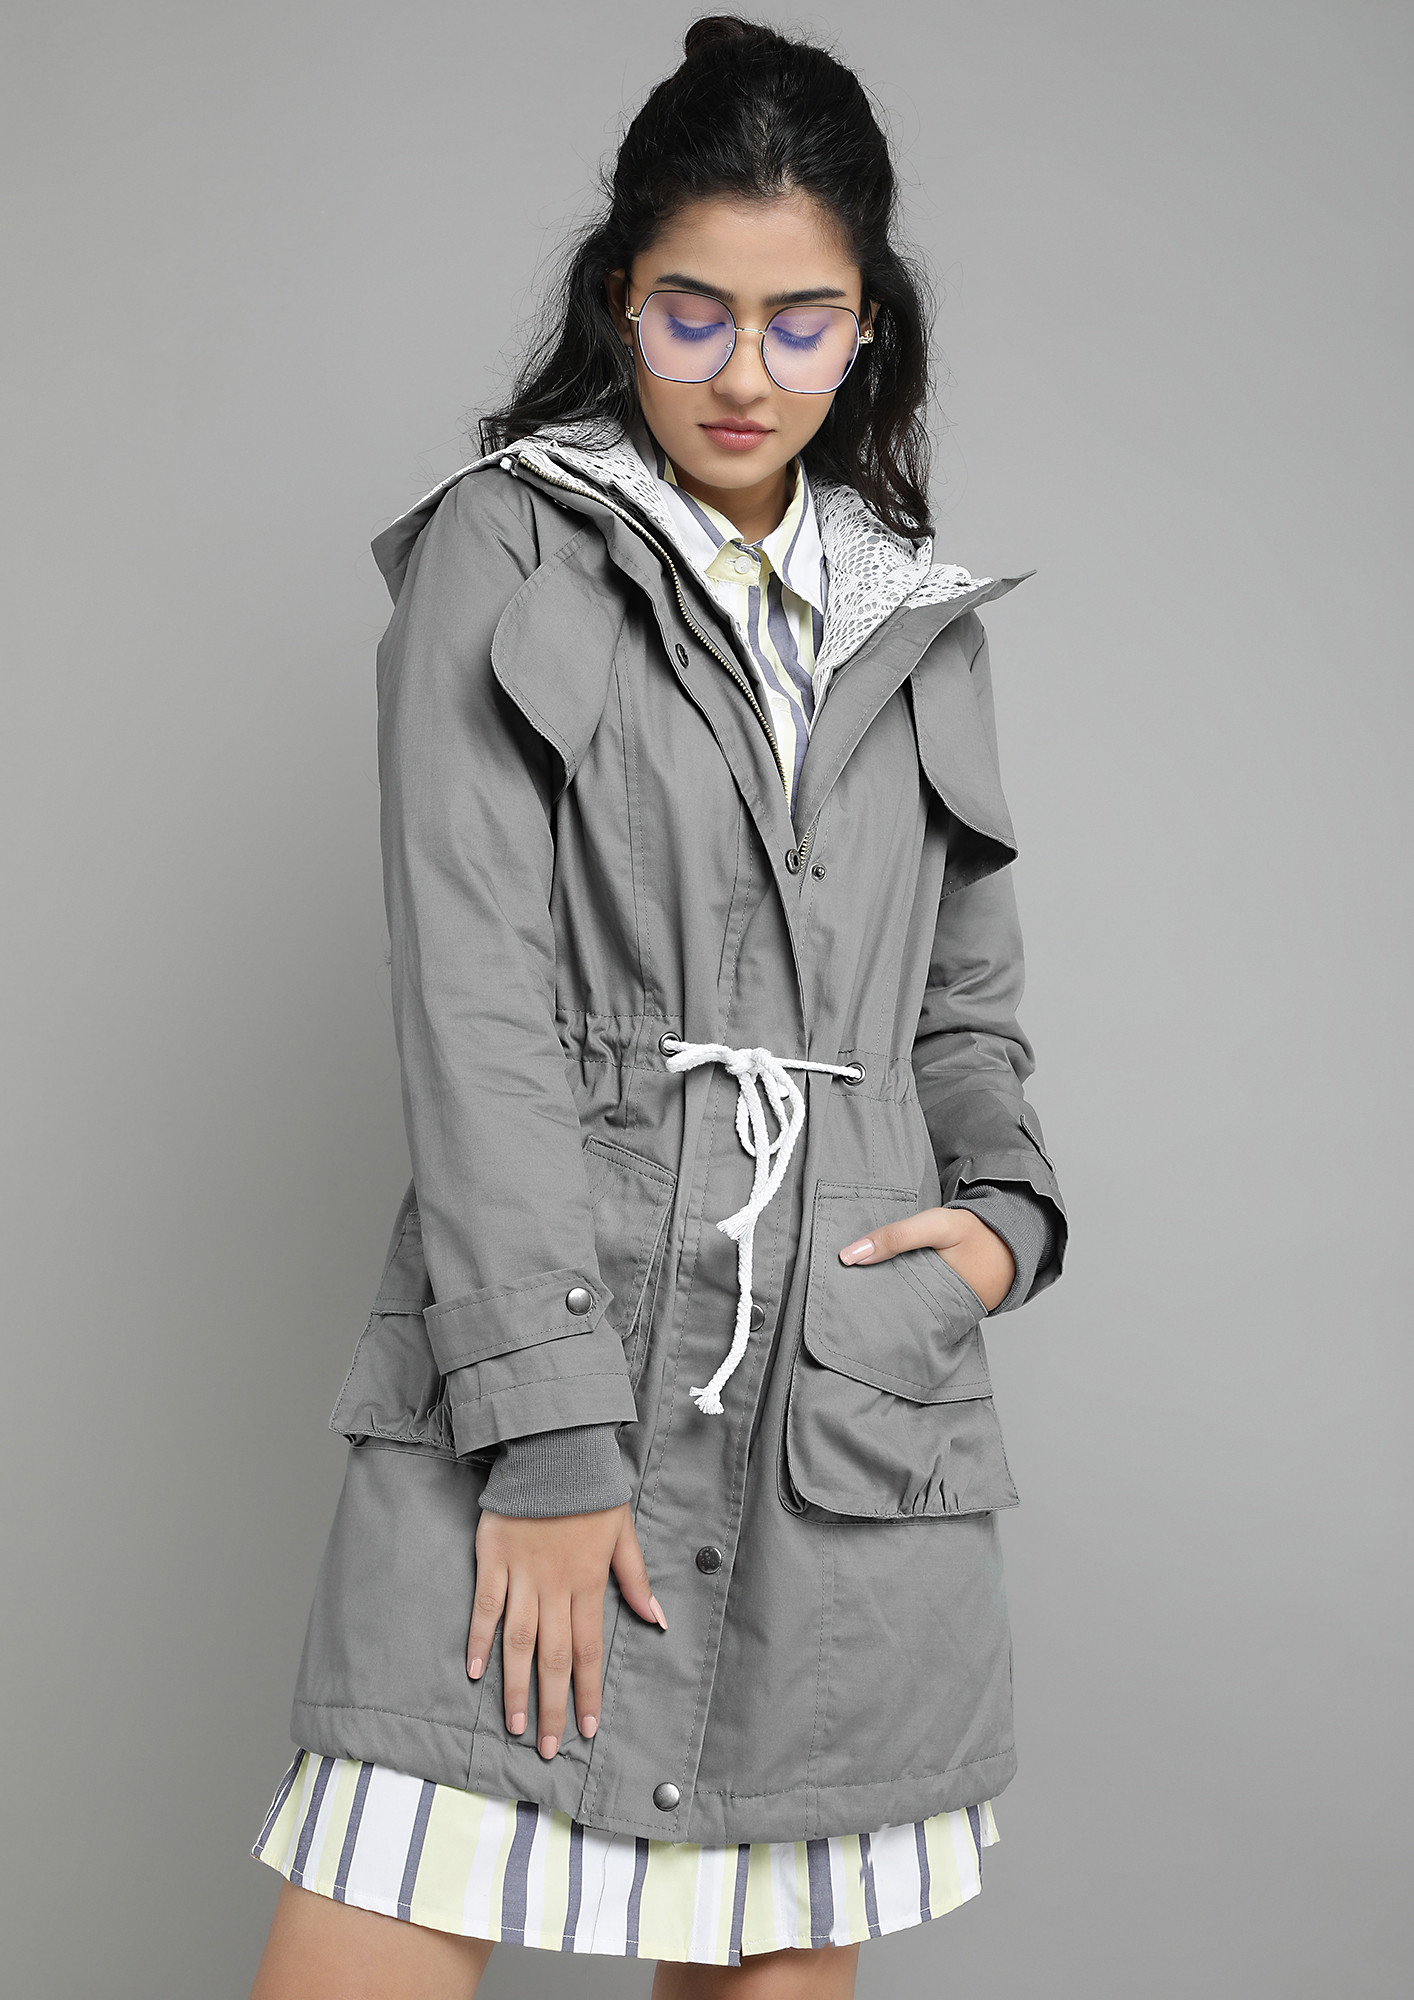 AGAINST THE WINDS GREY PARKA